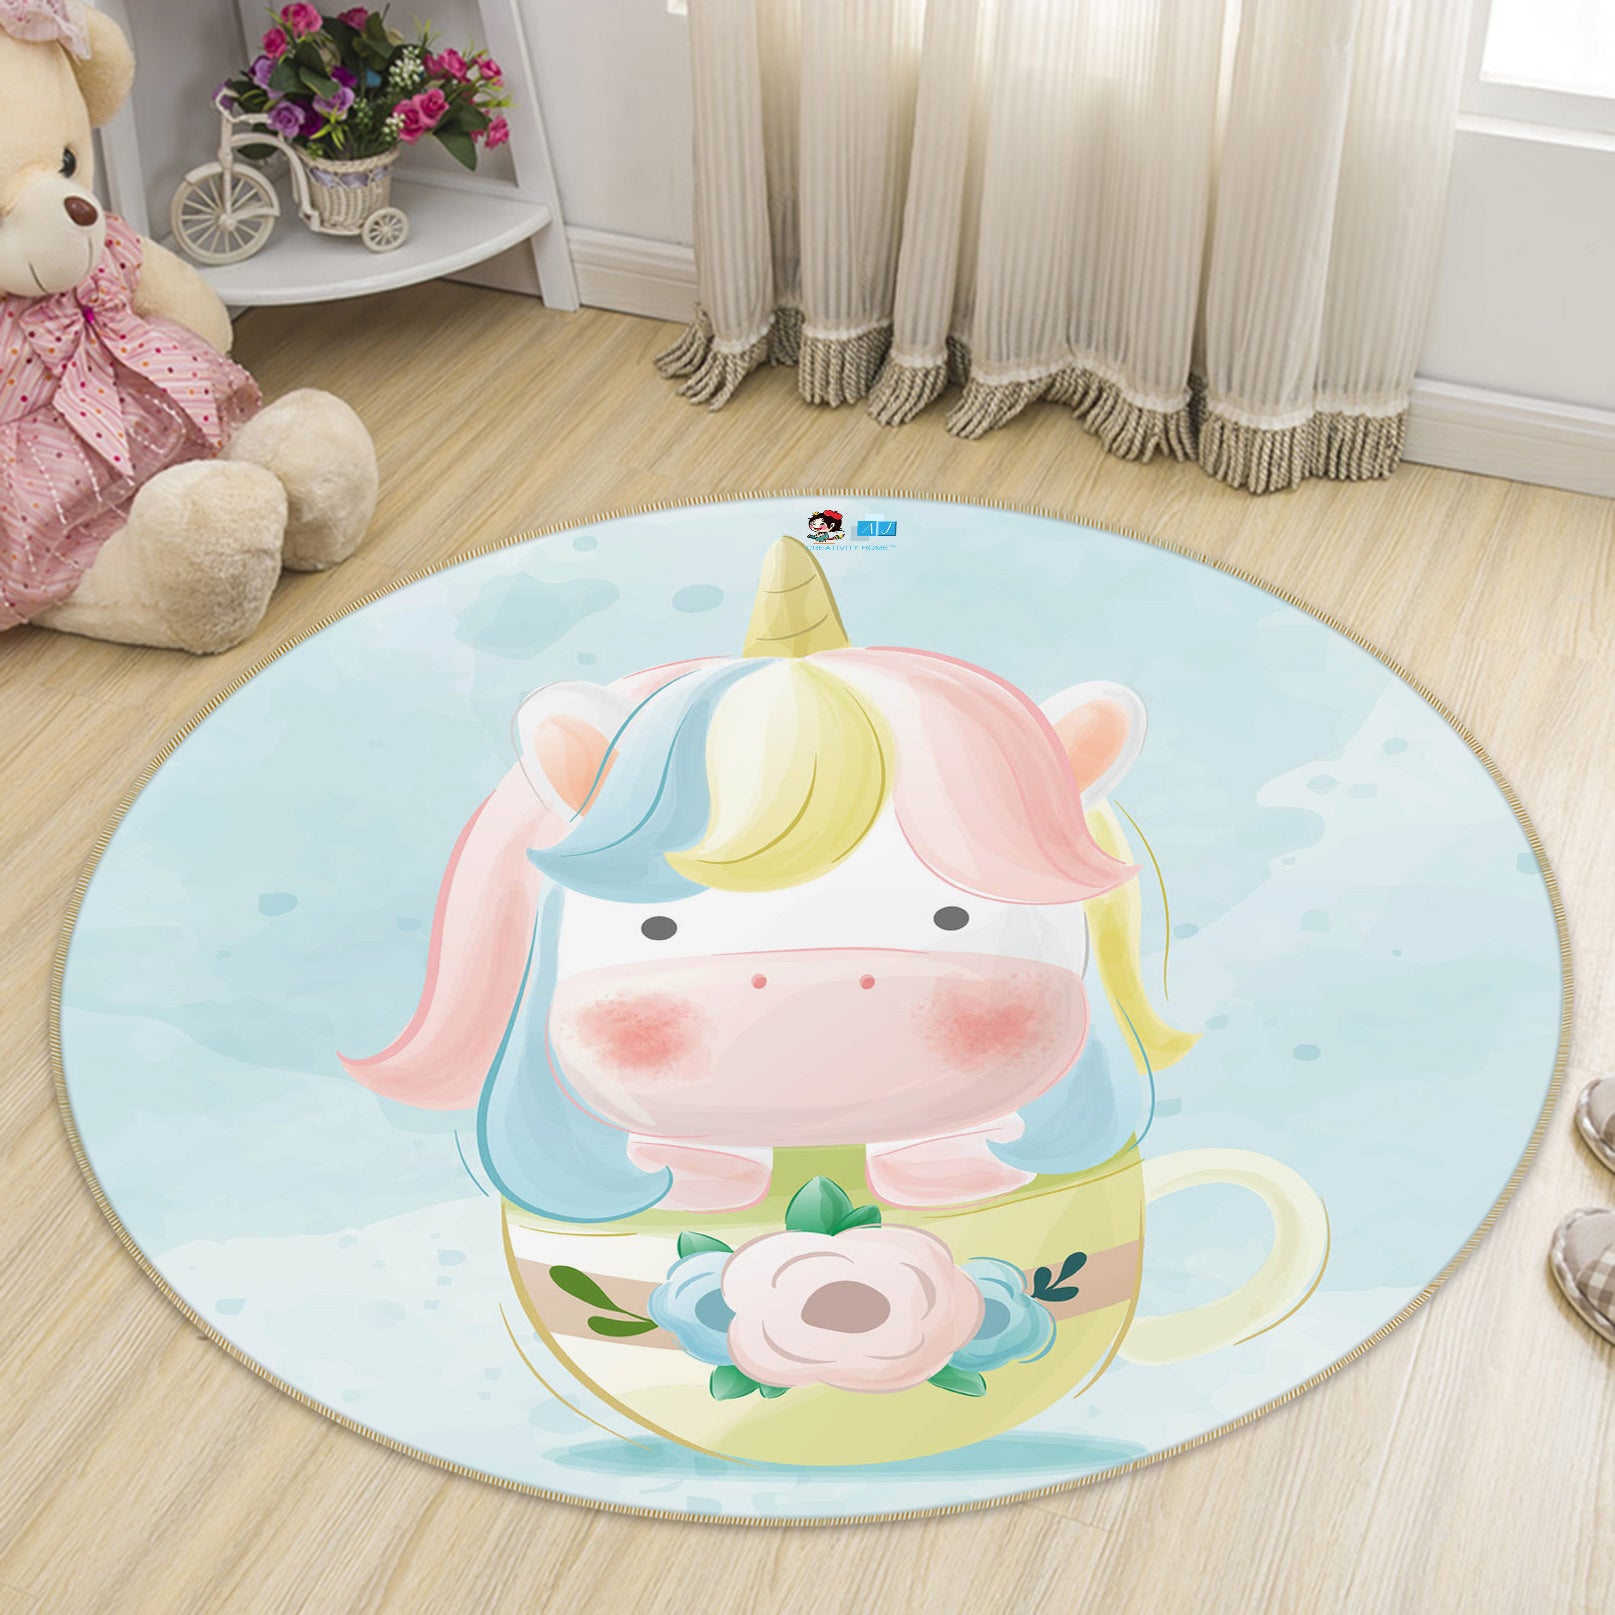 3D Light Colored Cow 75138 Round Non Slip Rug Mat